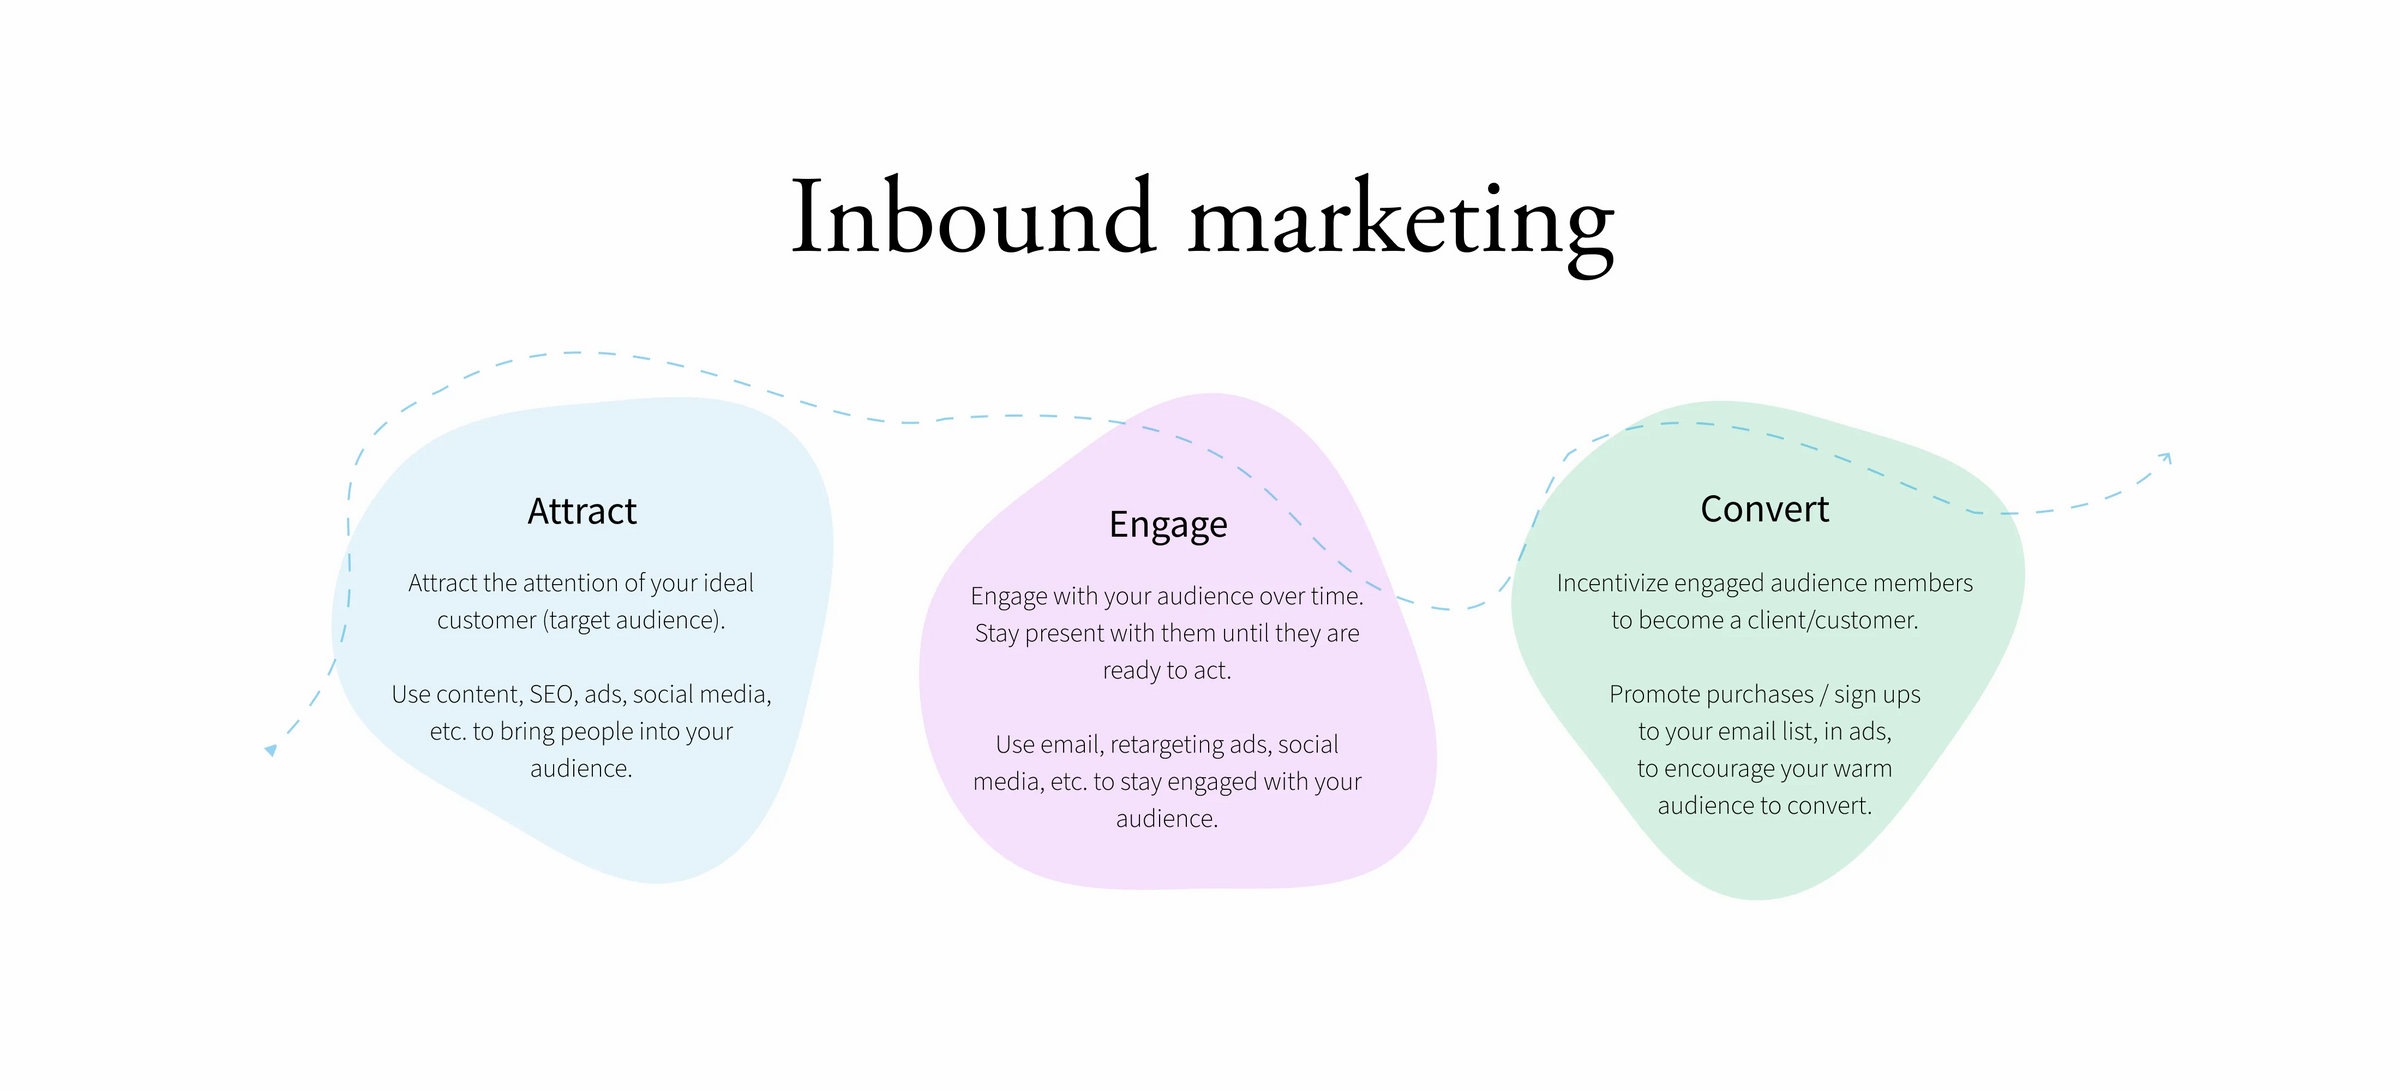 inbound marketing process illustrating the steps of attract, engage, and convert